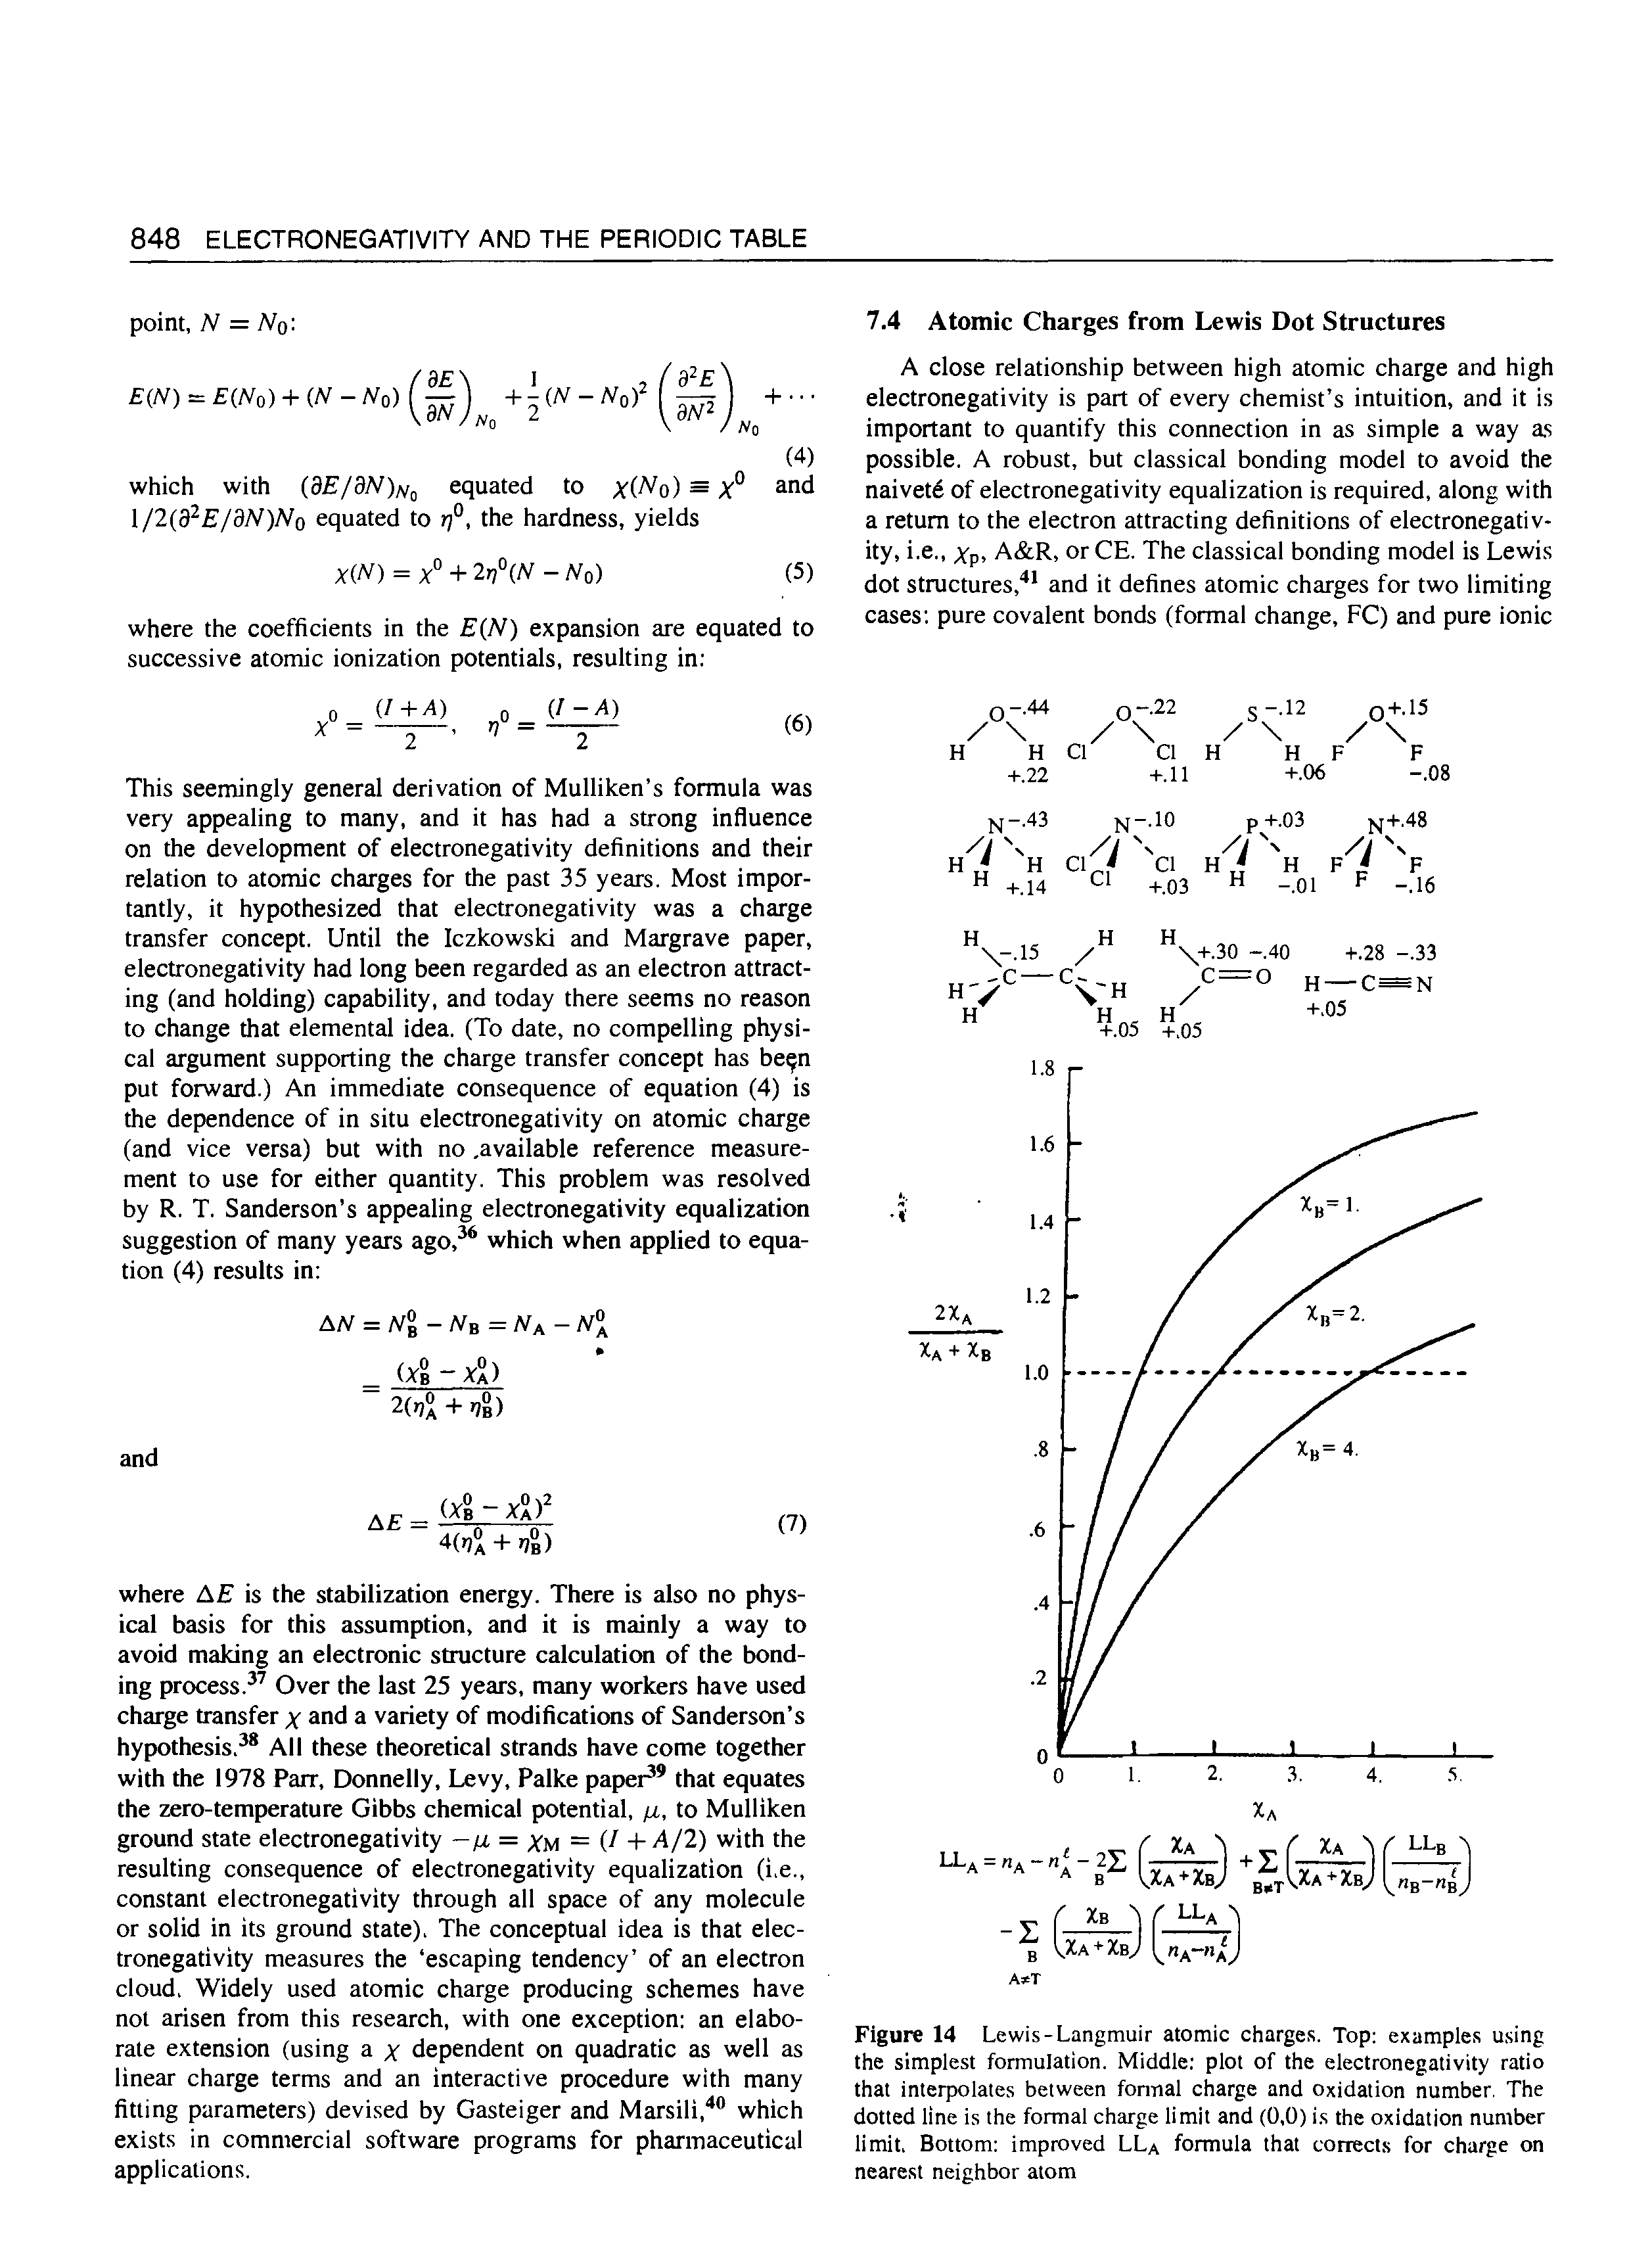 Figure 14 Lewis-Langmuir atomic charges. Top examples using the simplest formulation. Middle plot of the electronegativity ratio that interpolates between fonnal charge and oxidation number. The dotted line is the formal charge limit and (0,0) is the oxidation number limit. Bottom improved LLa formula that corrects for charge on nearest neighbor atom...